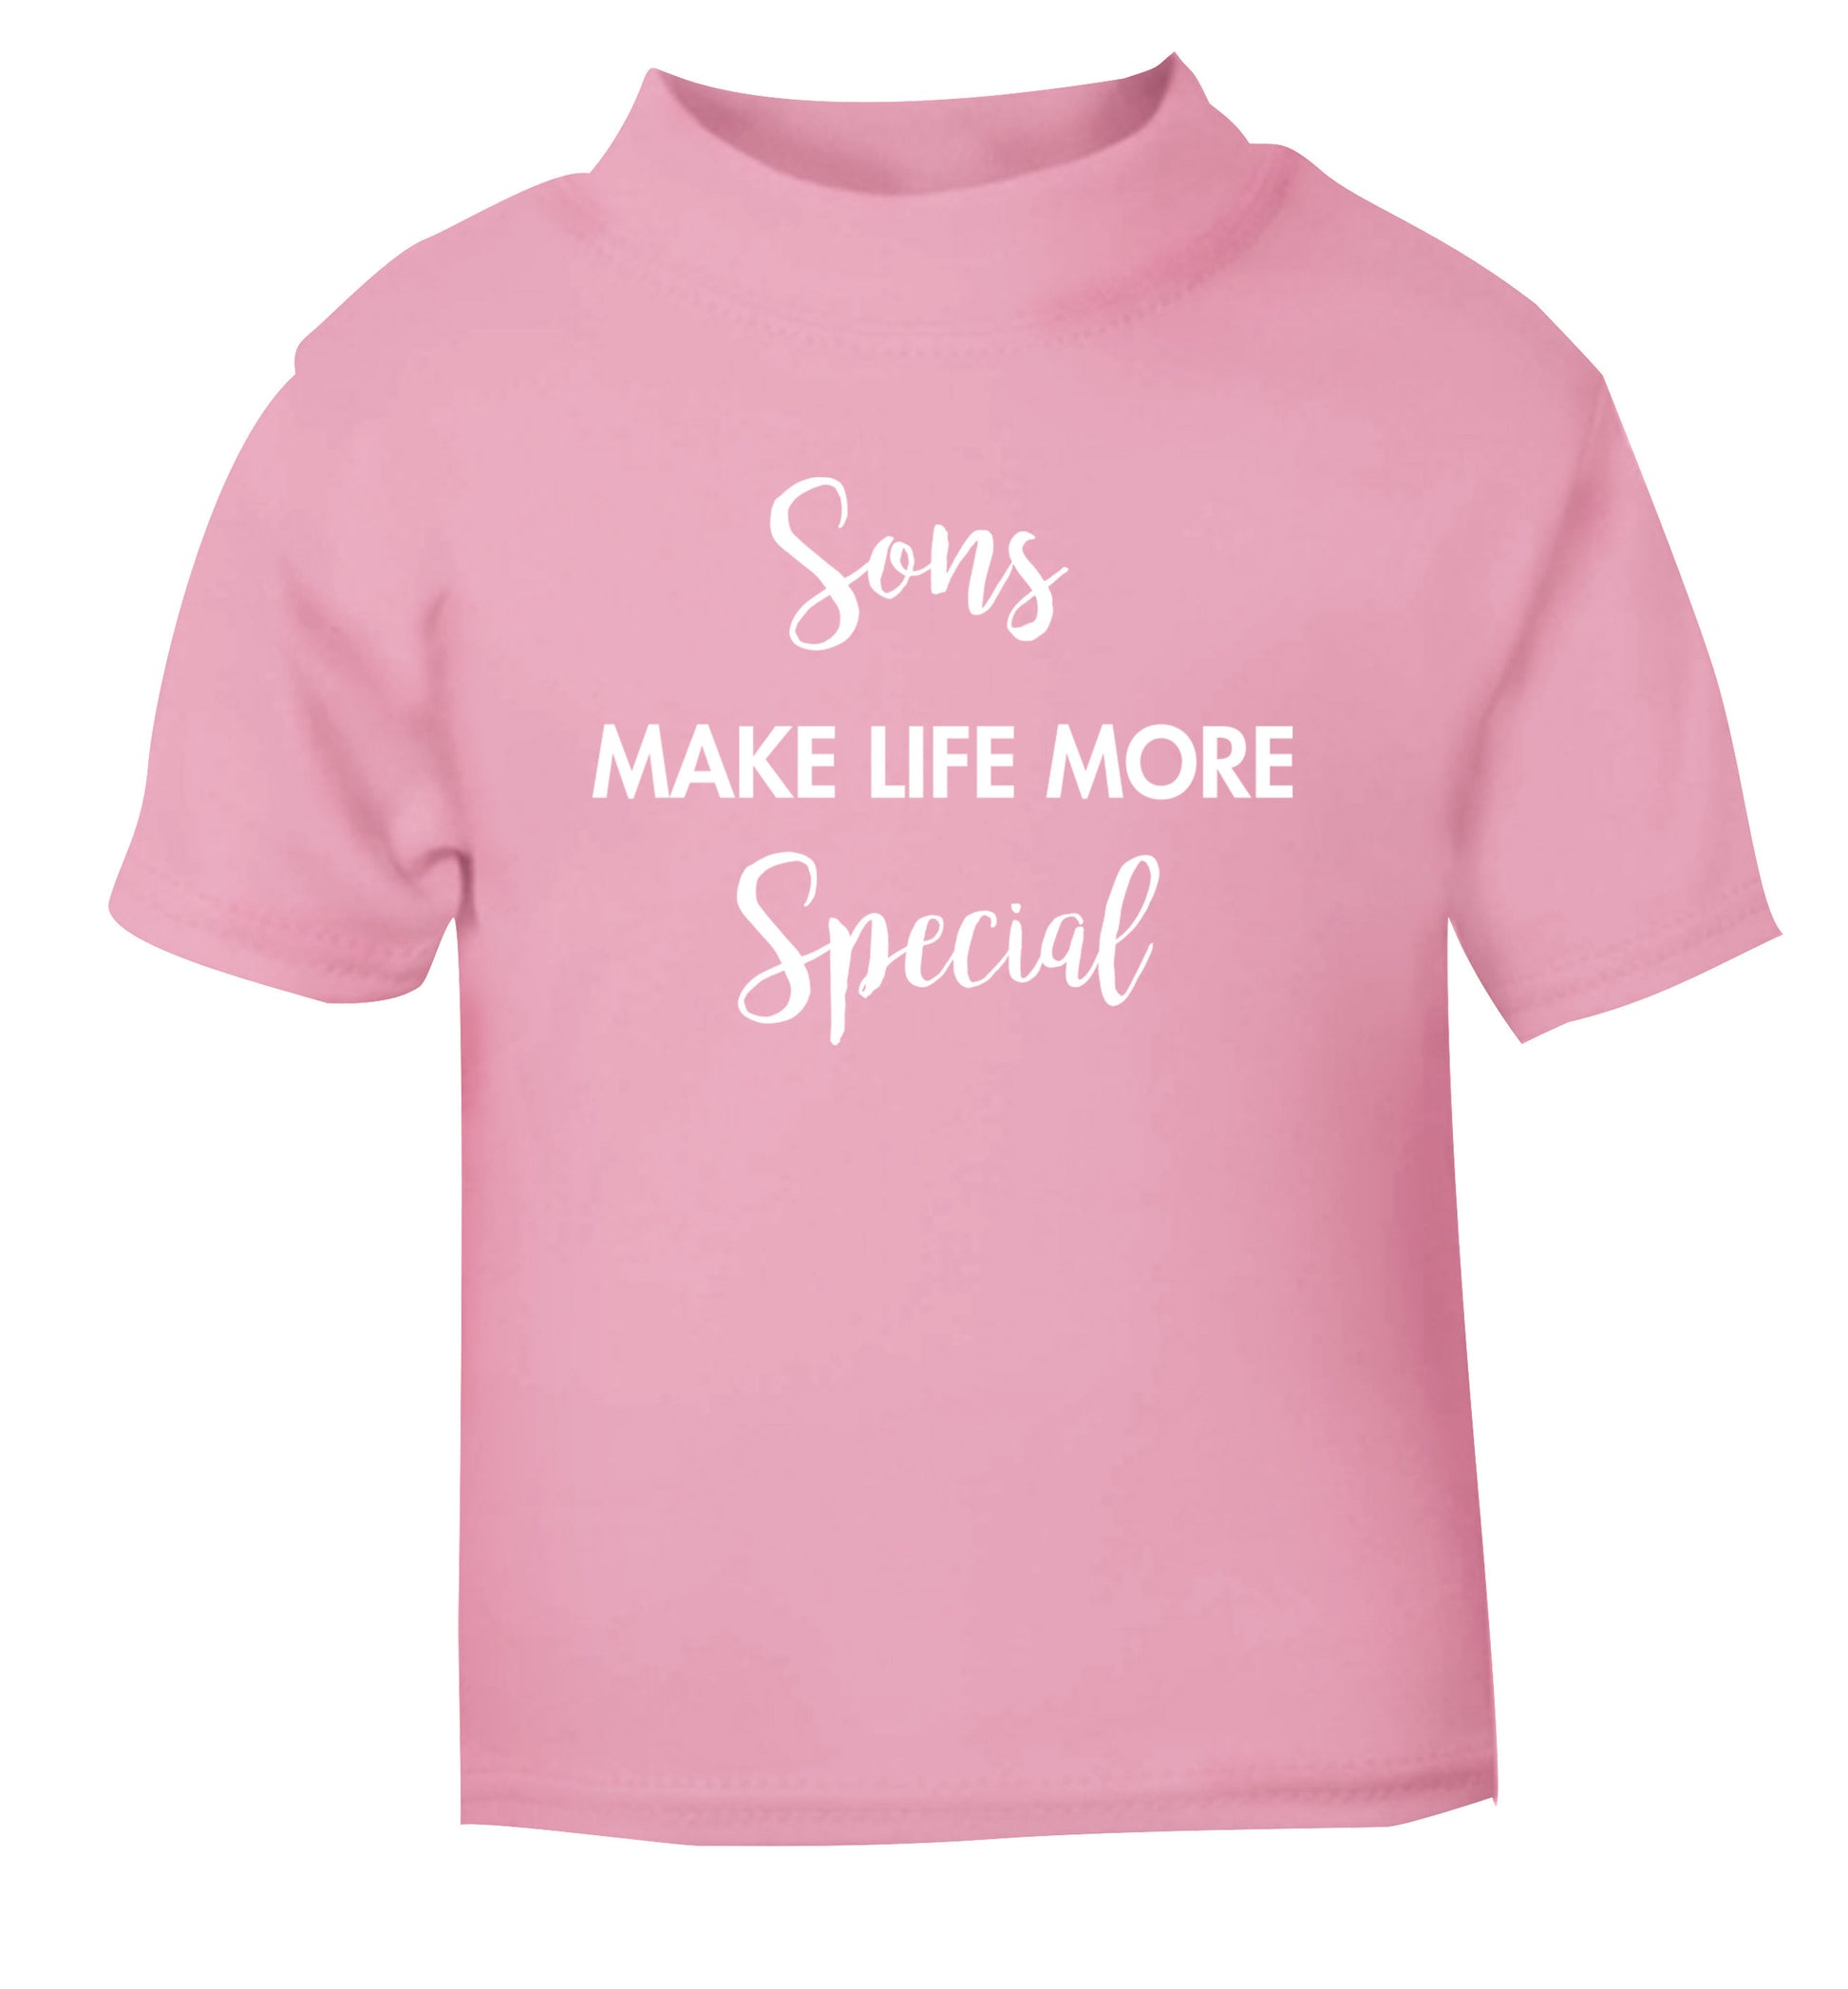 Daughters make life more special light pink Baby Toddler Tshirt 2 Years